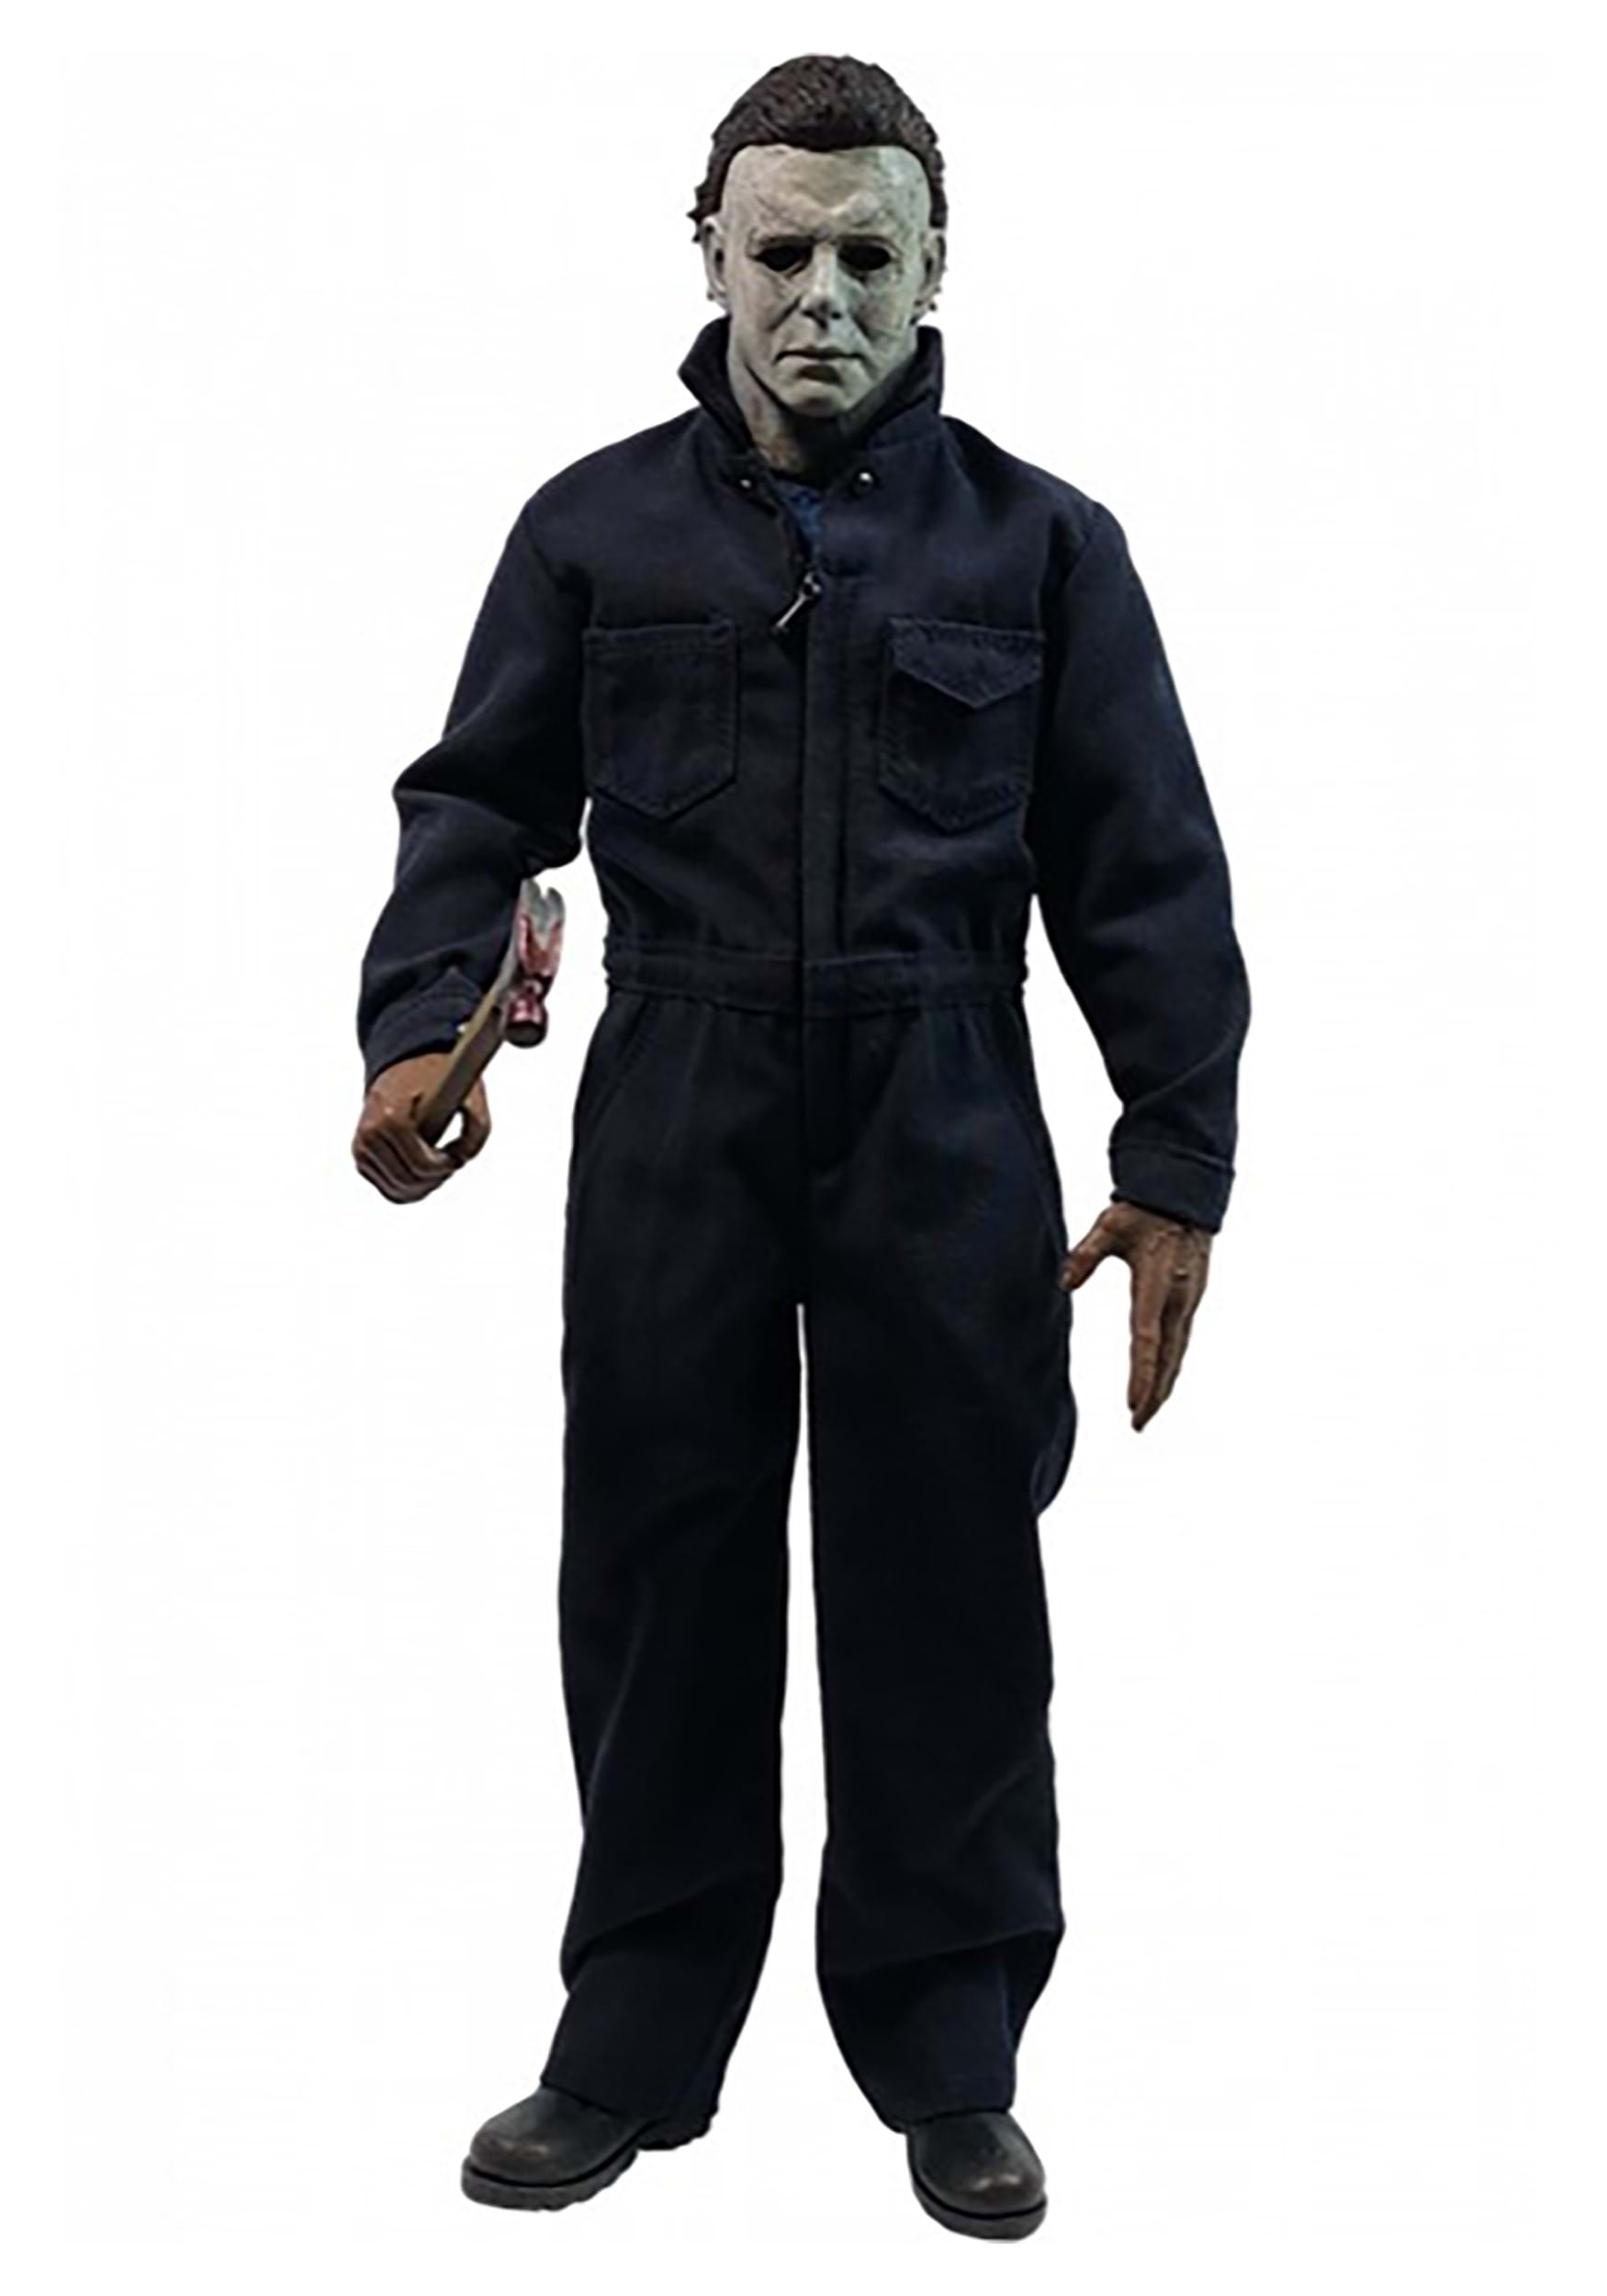 Halloween 2018 Michael Myers 12" Collectible Horror Action Figure